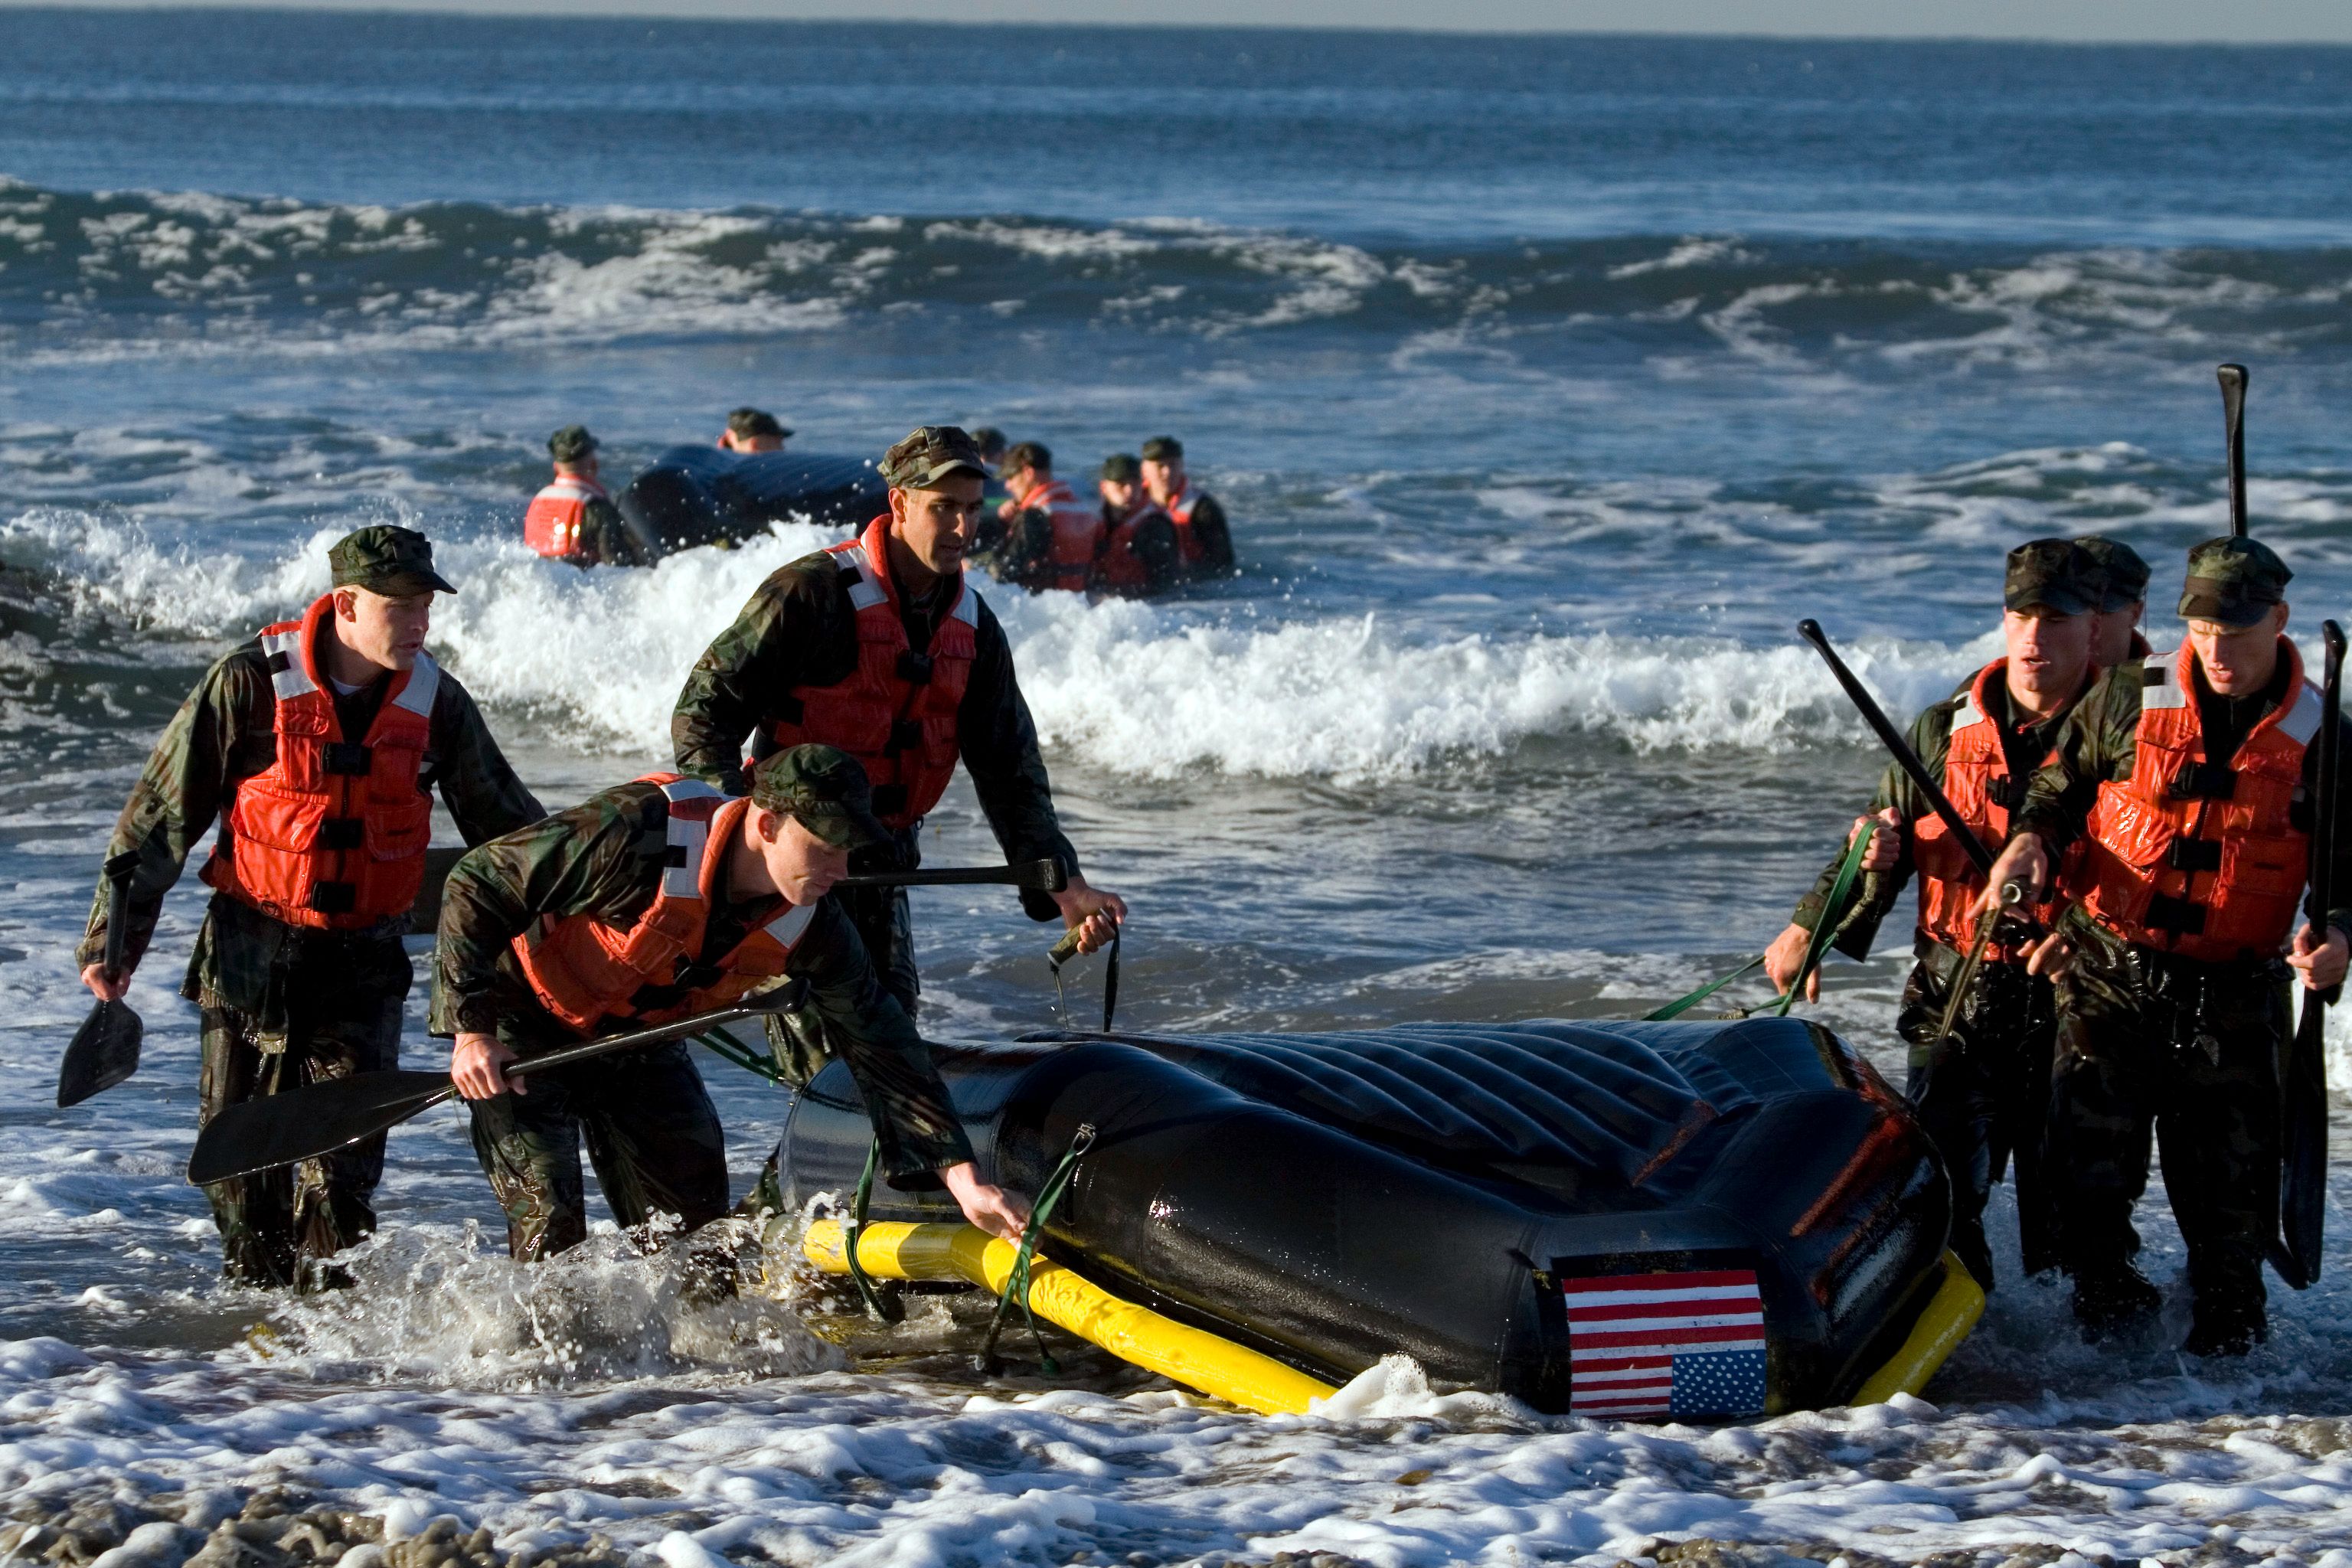 Basic Underwater Demolition/ SEAL (BUDS) students drag their boat back to shore during their first Surf Passage at the Naval Special Warfare Center at the Naval Amphibious Base Coronado. This is one of many evolutions during the first phase of BUDS training where students are tested both mentally and physically to prepare them for life as a special operator. (U.S. Navy photo by Mass Communication Specialist 3rd Class Blake R. Midnight (Released)